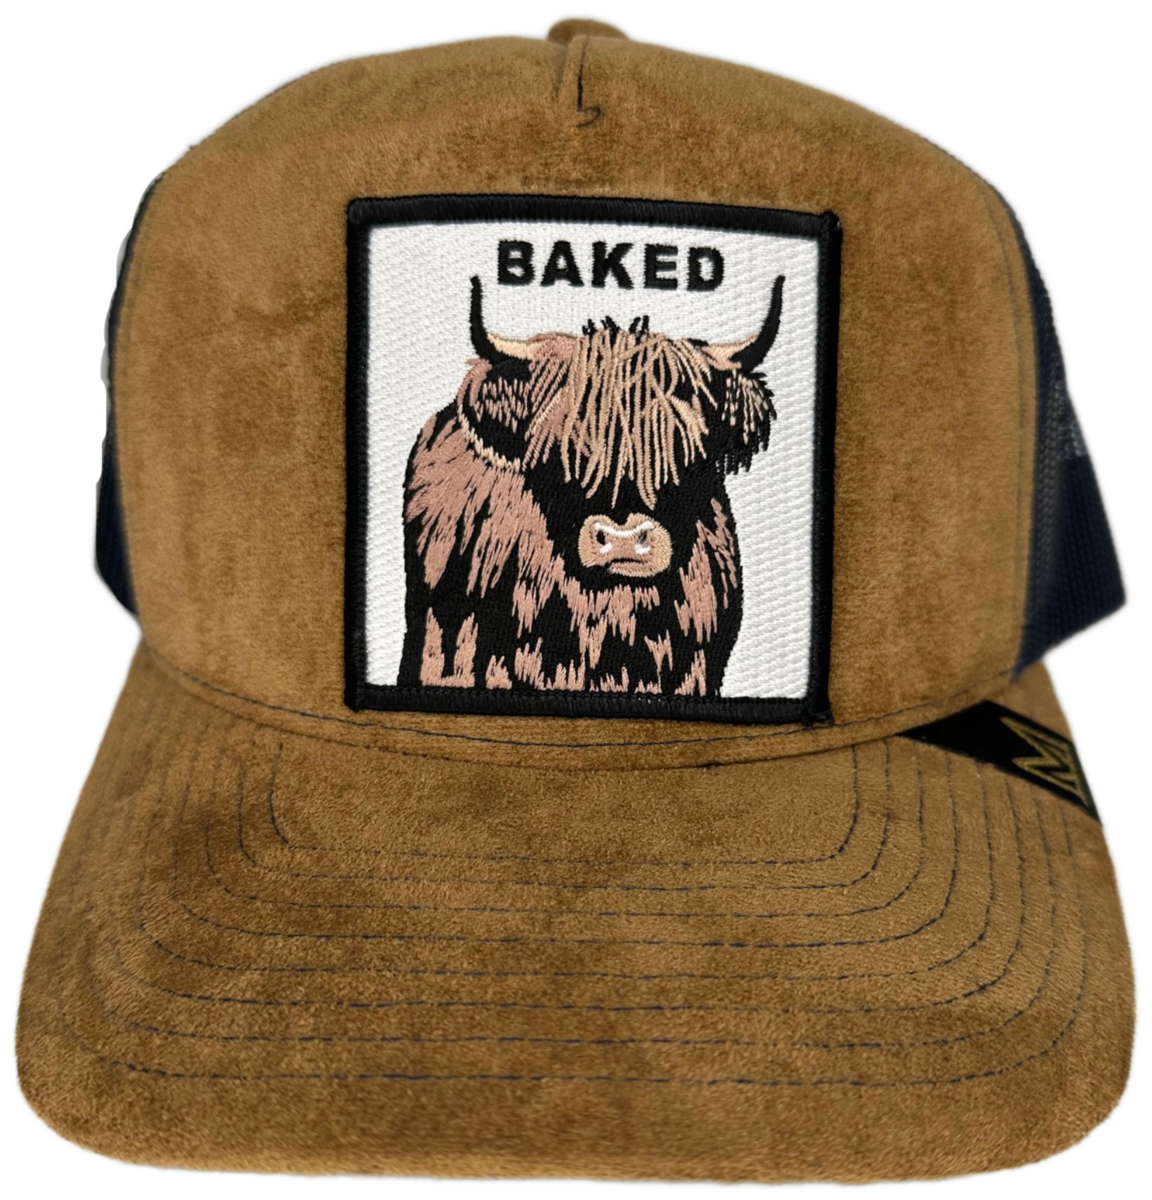 Baked - Suede